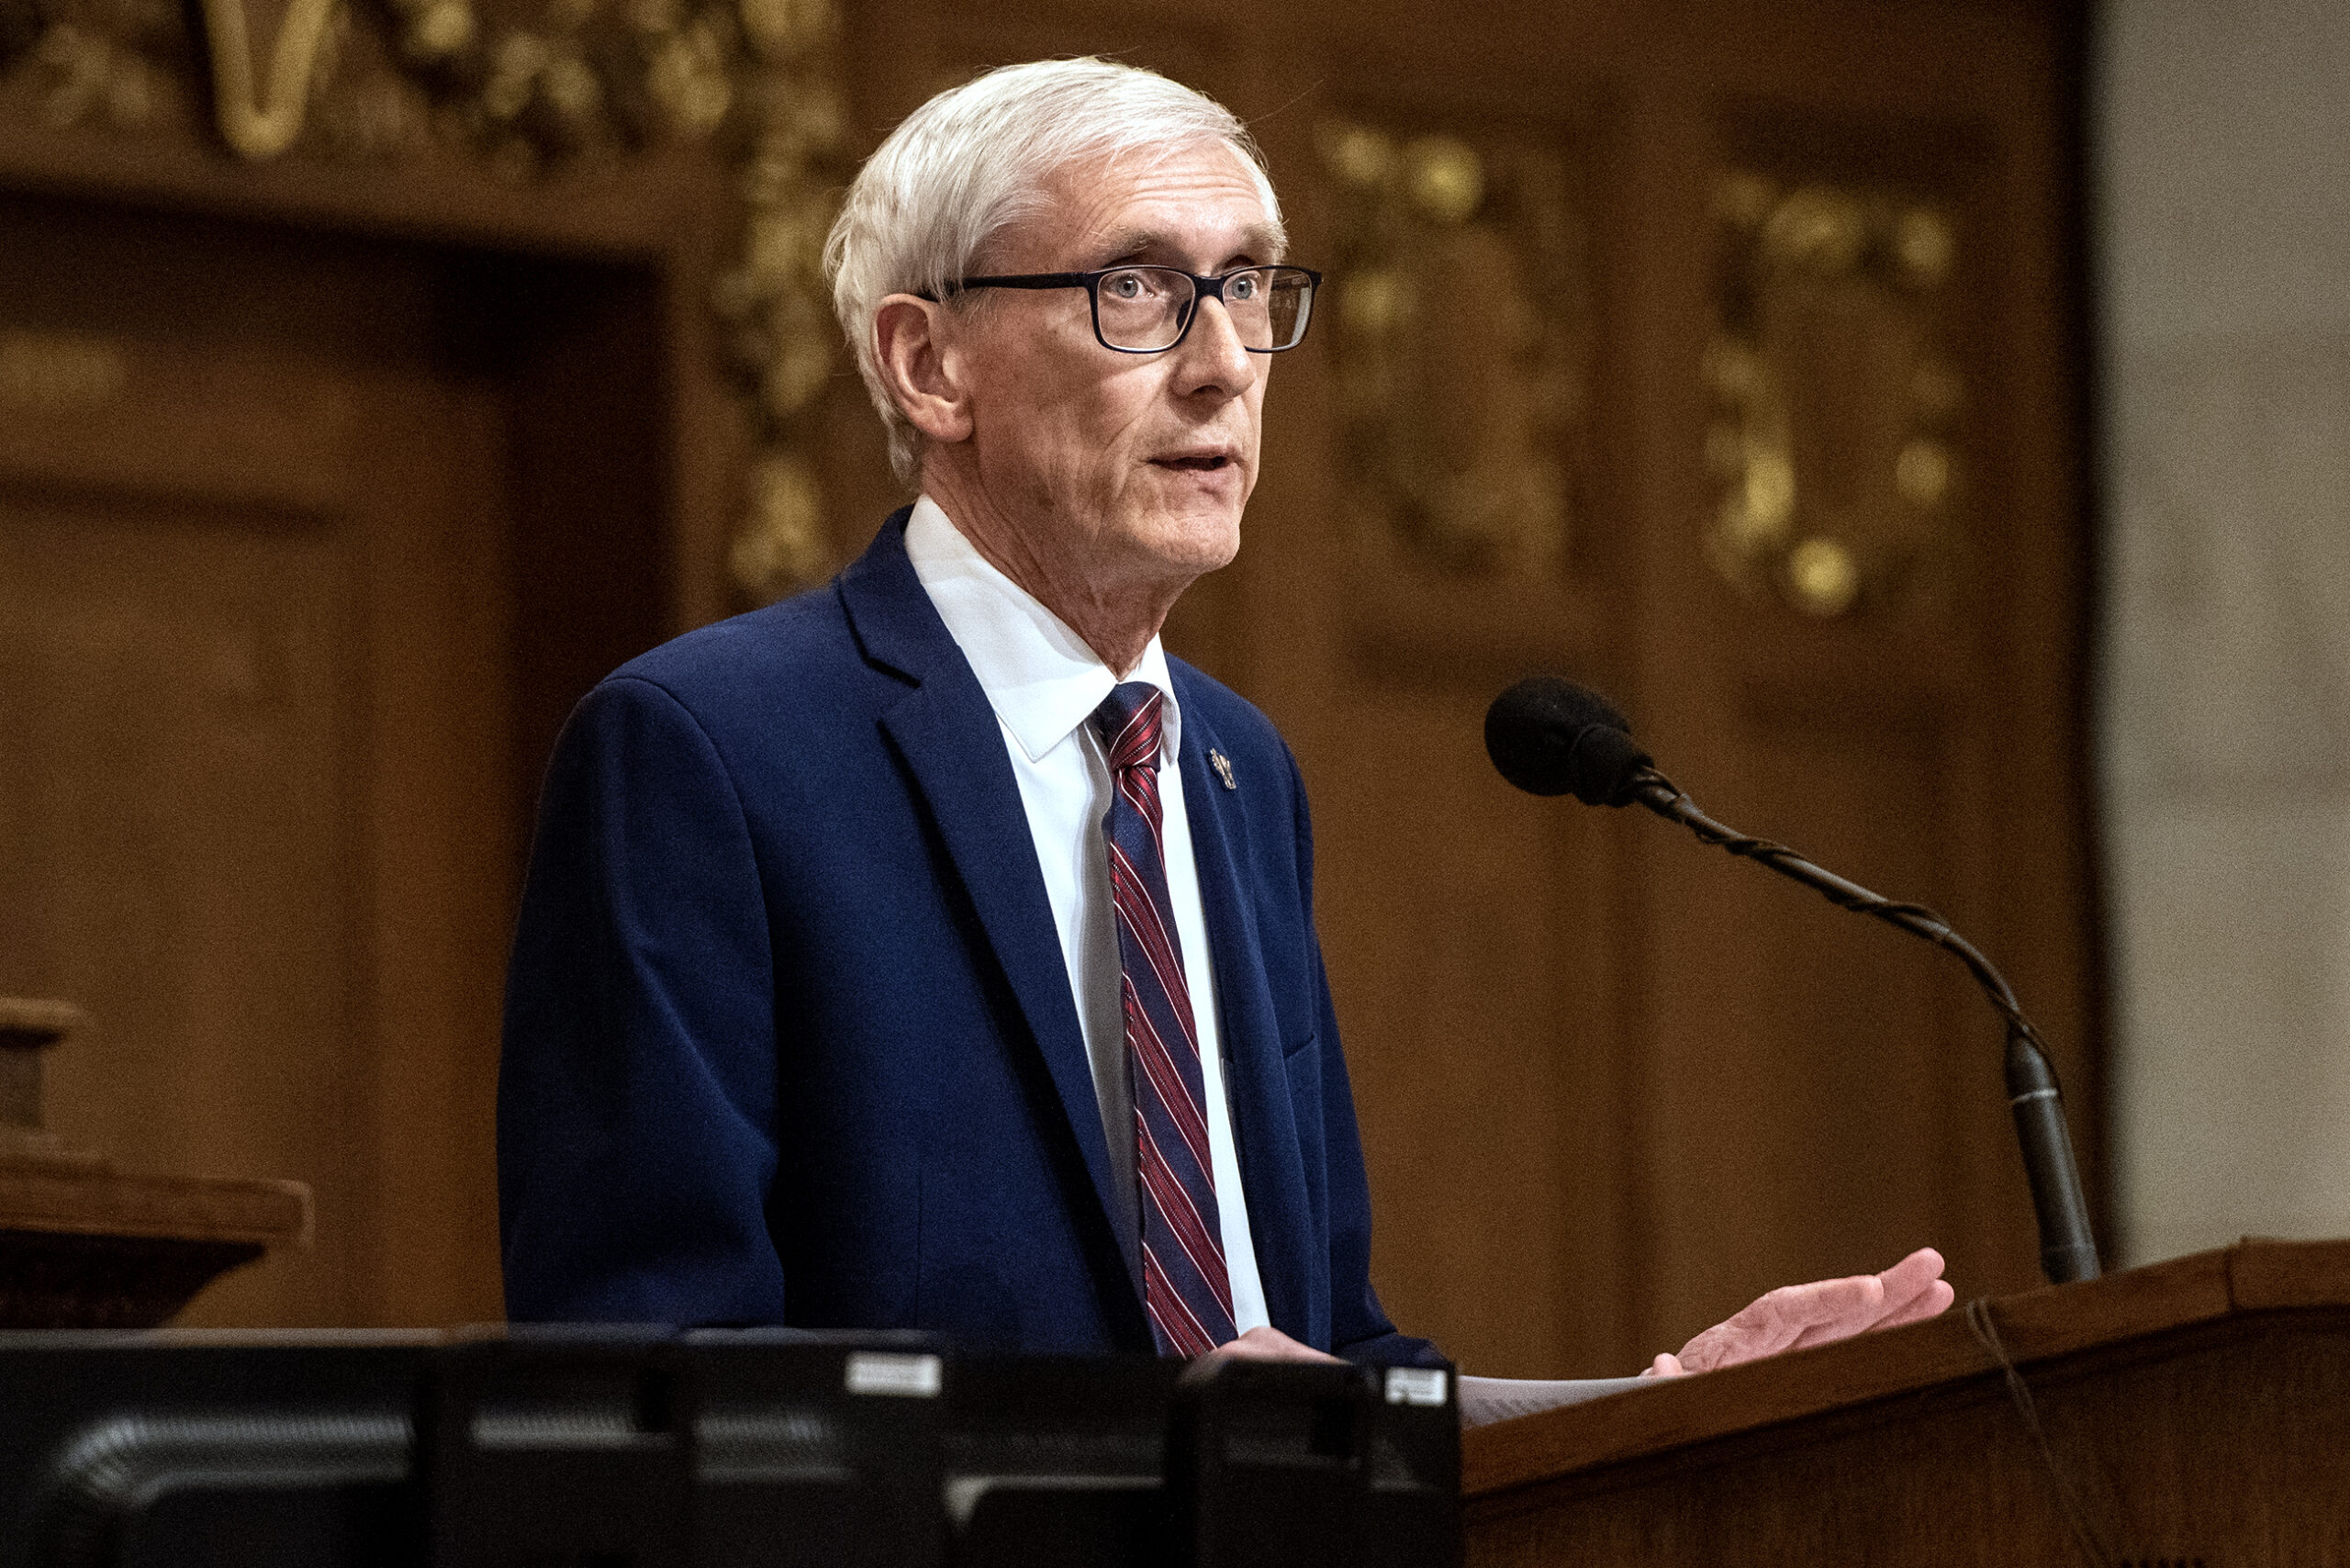 Gov. Tony Evers stands at a podium during a speech.